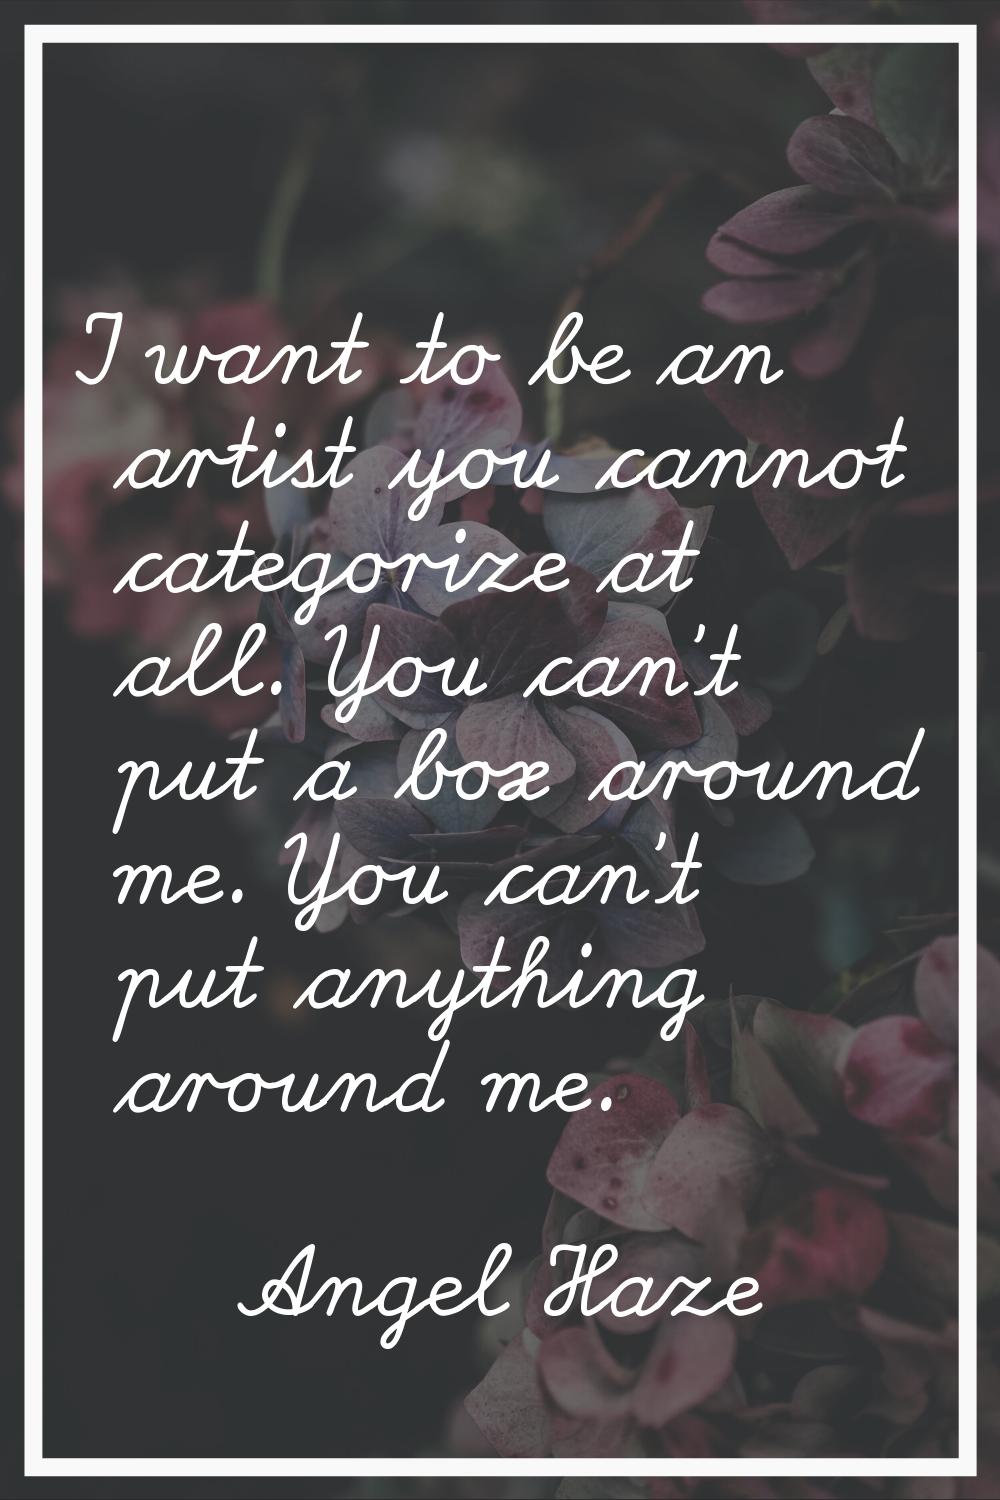 I want to be an artist you cannot categorize at all. You can't put a box around me. You can't put a